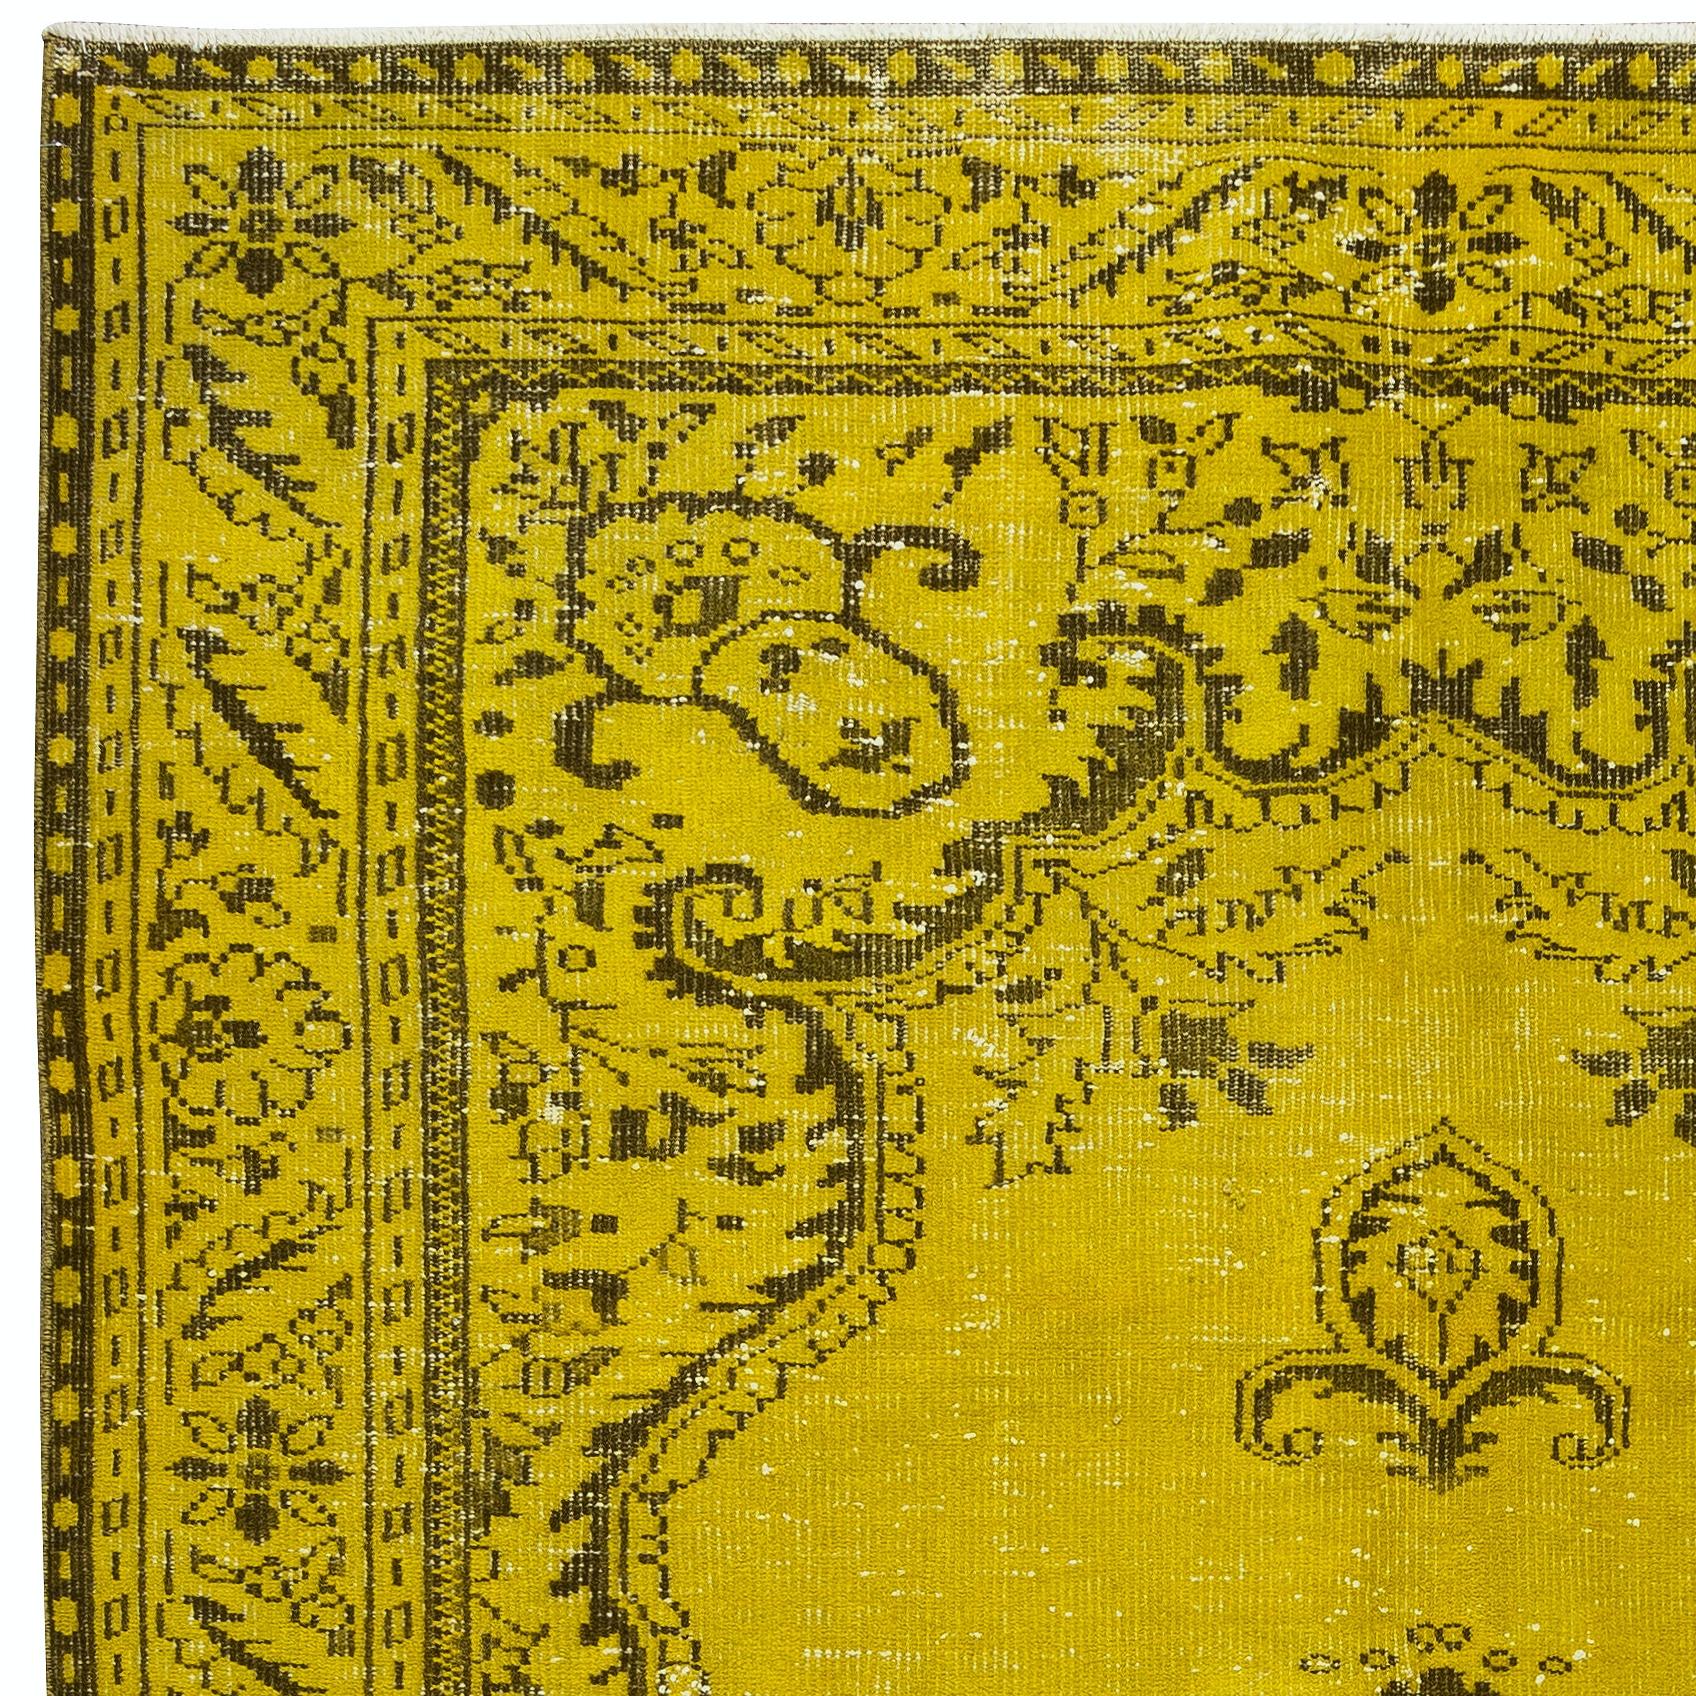 6.2x10.3 Ft Yellow Area Rug. Handmade Turkish Vintage Carpet, Modern Home Decor In Good Condition For Sale In Philadelphia, PA